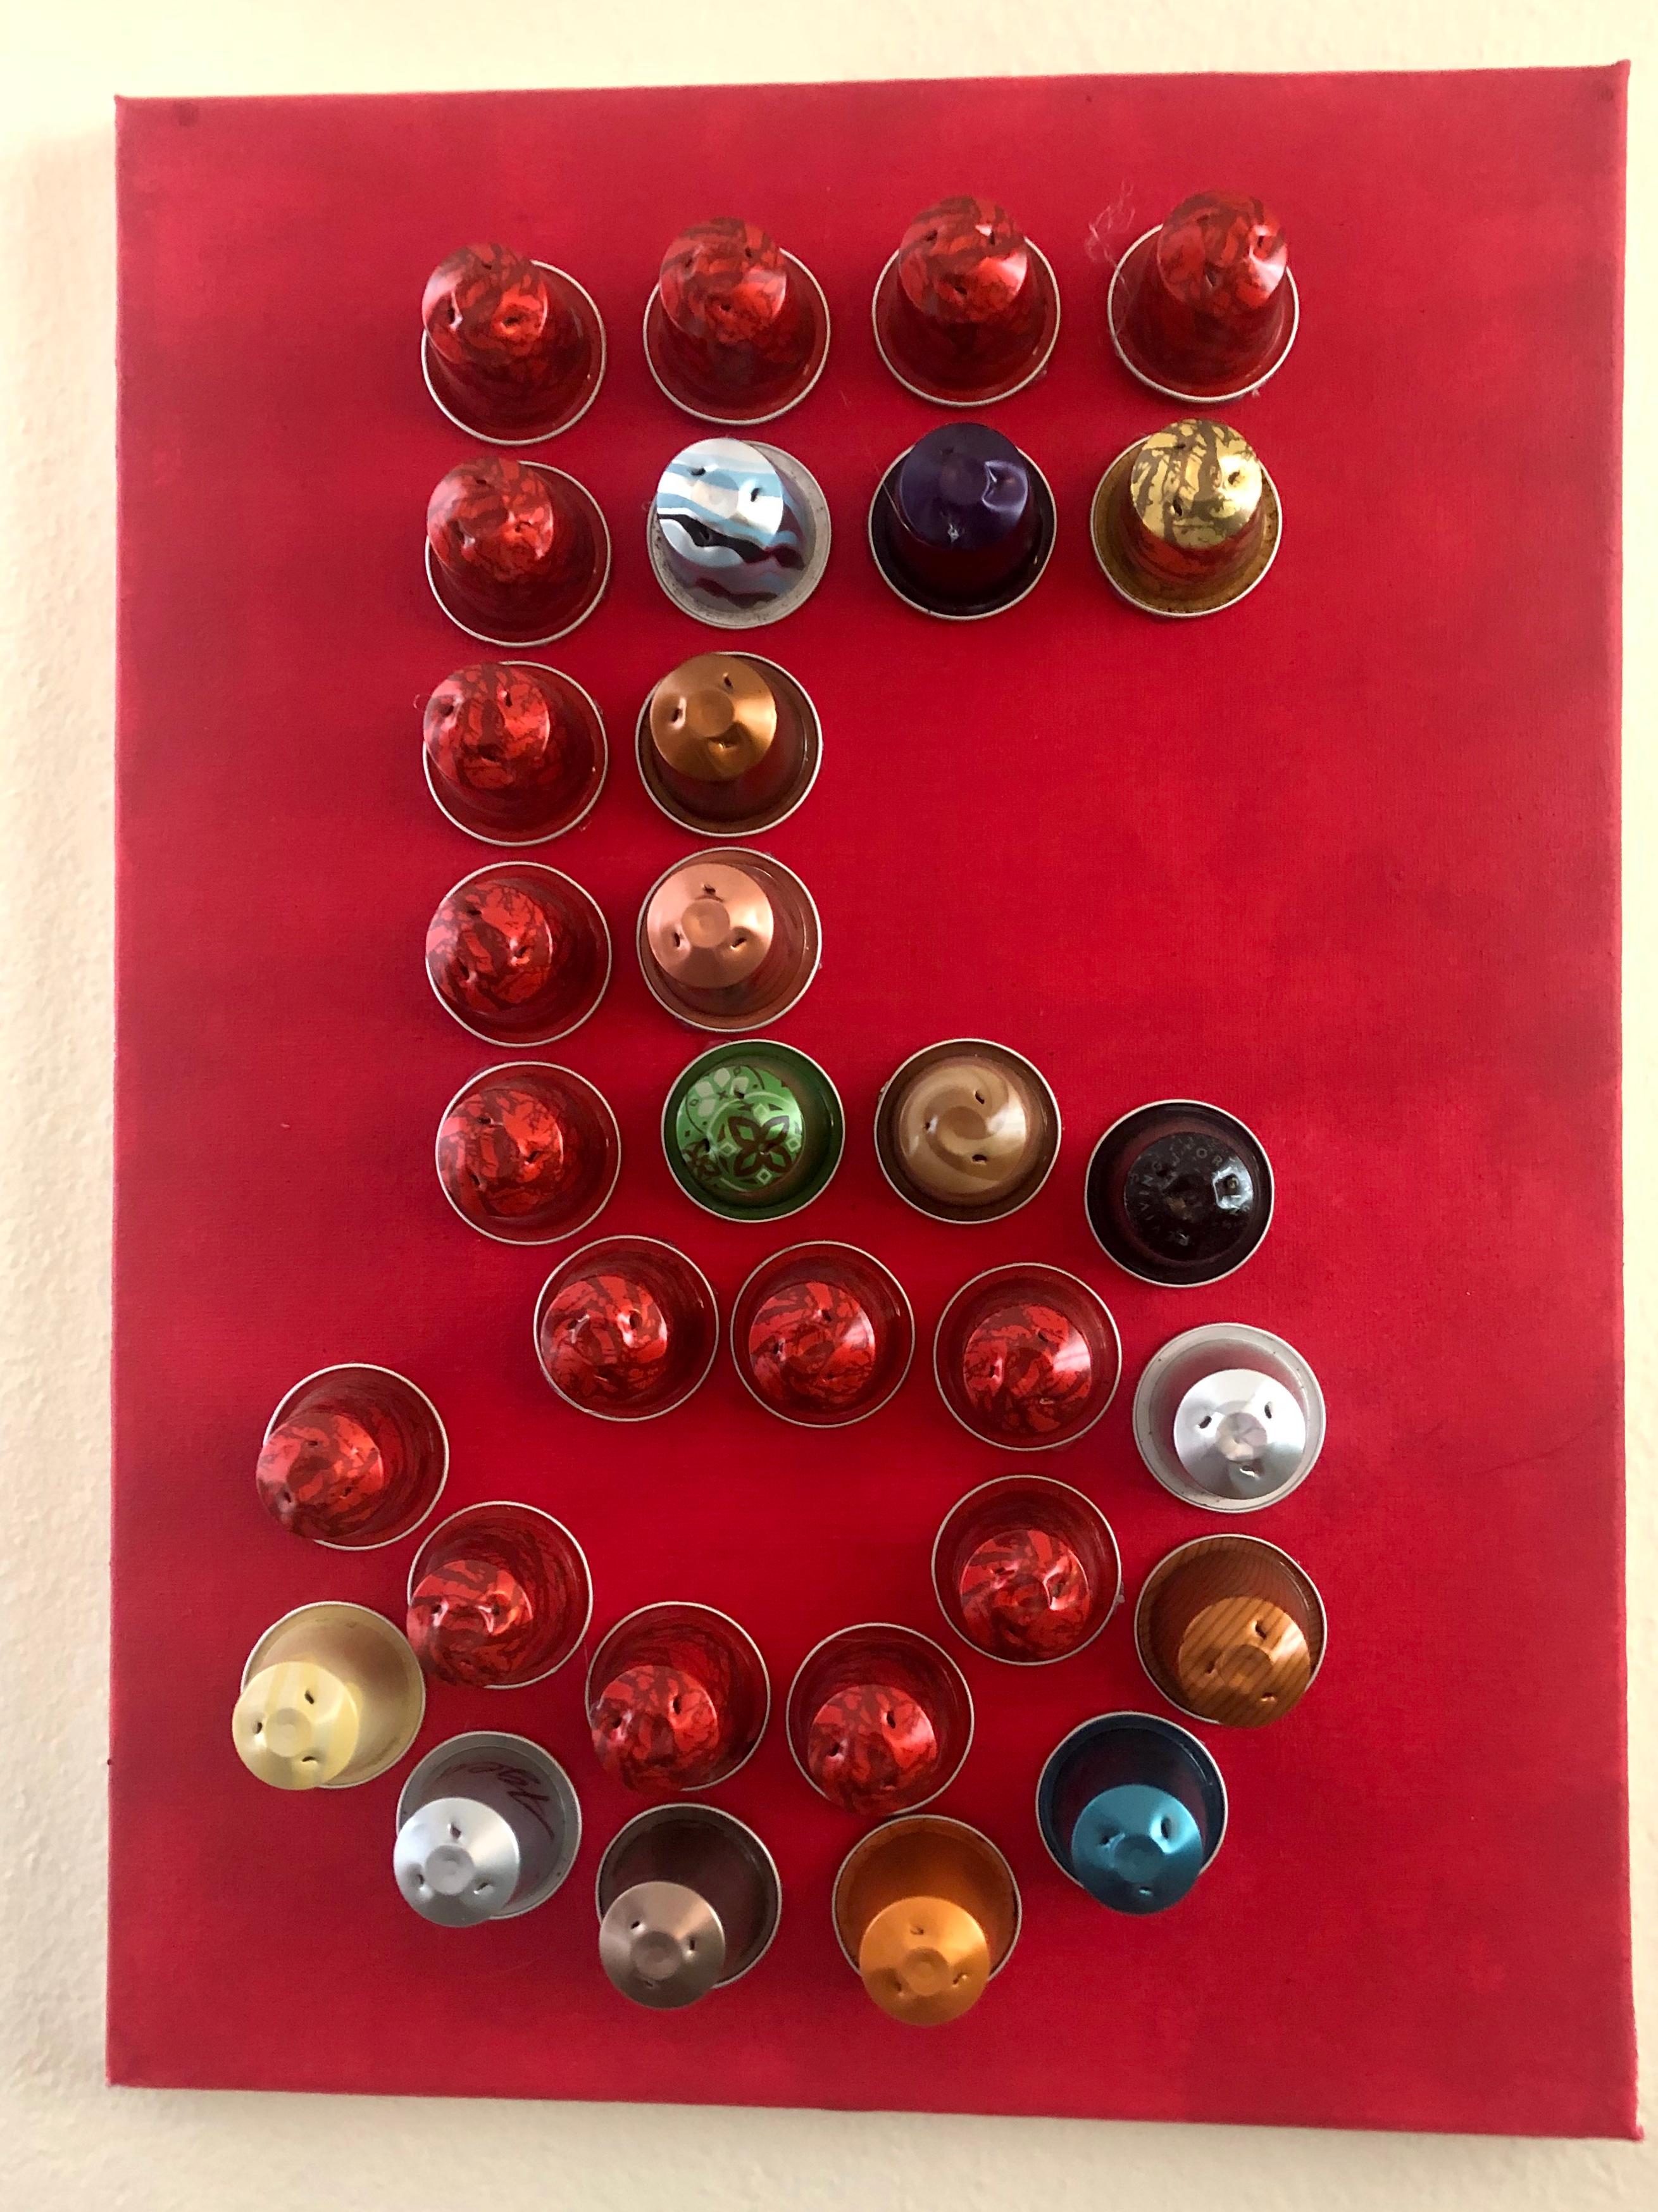 The picture is a part of the cycle RECYCLED, done during the pandemic and remembering all of us about the fragility of life. The material is acrylic on canvas and used Nespresso capsules. The number 